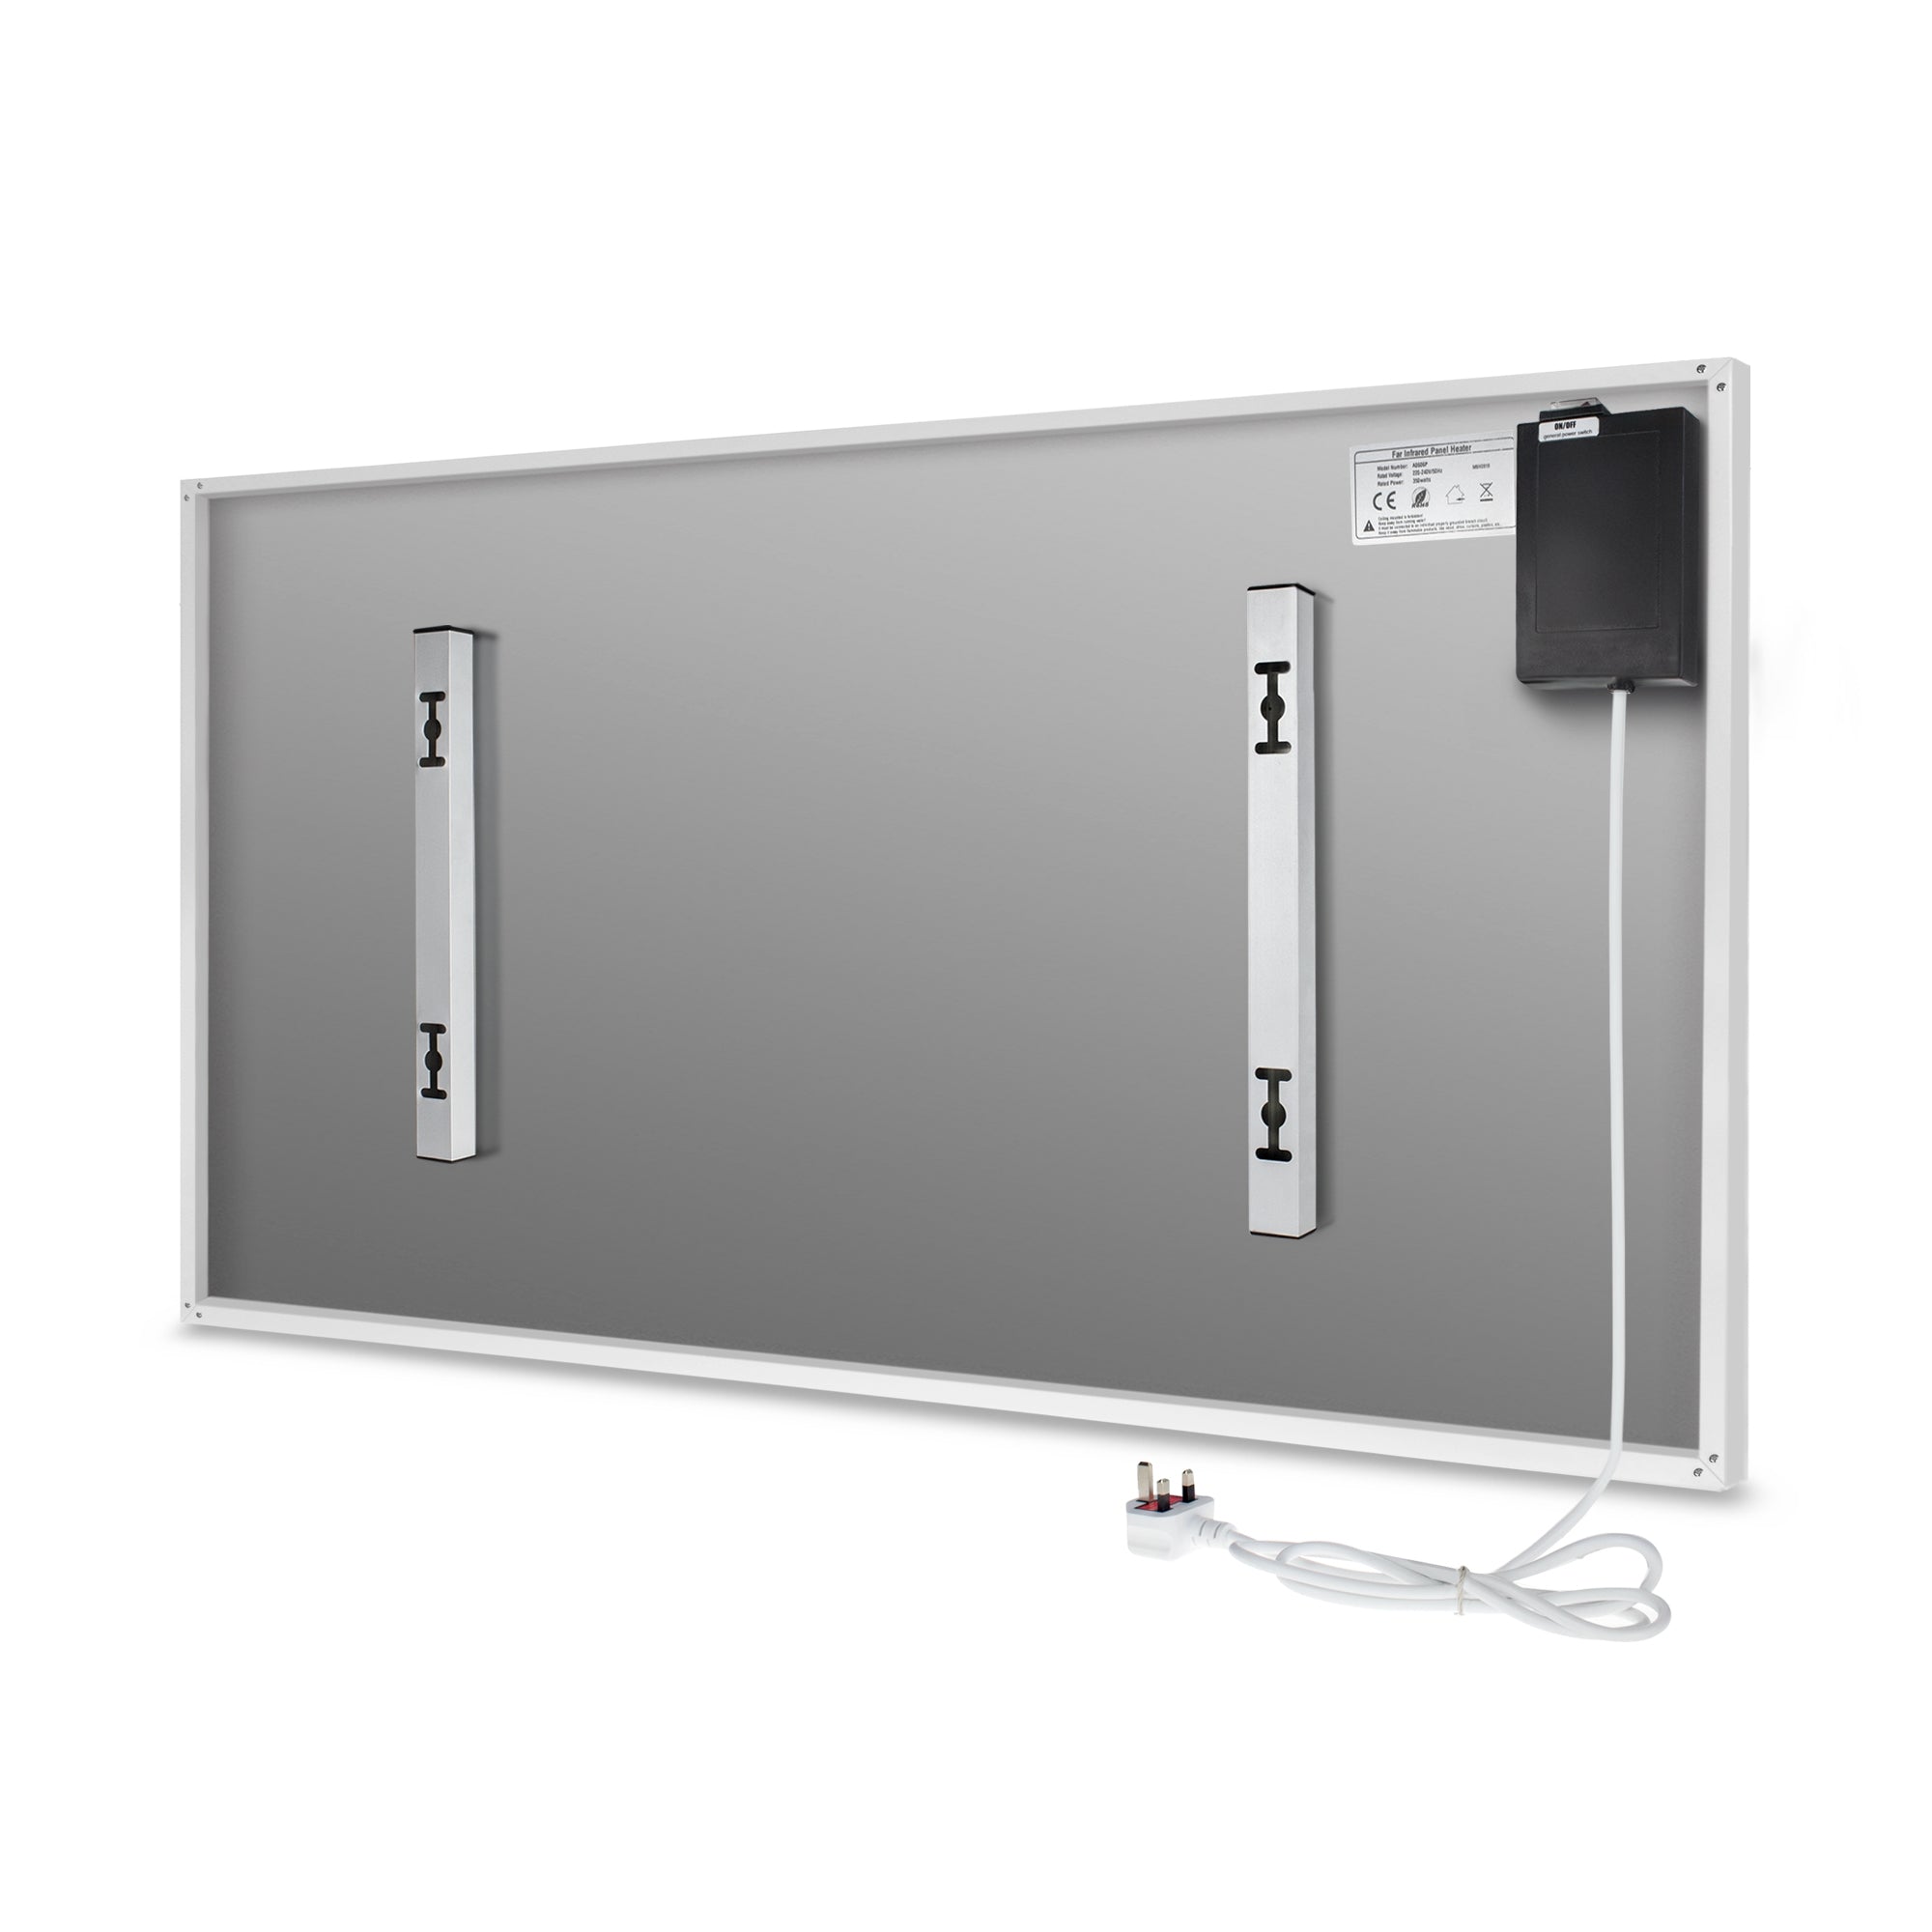 700w Personalised Image NRGPRO Infrared Heating Panel - Electric Wall Panel Heater